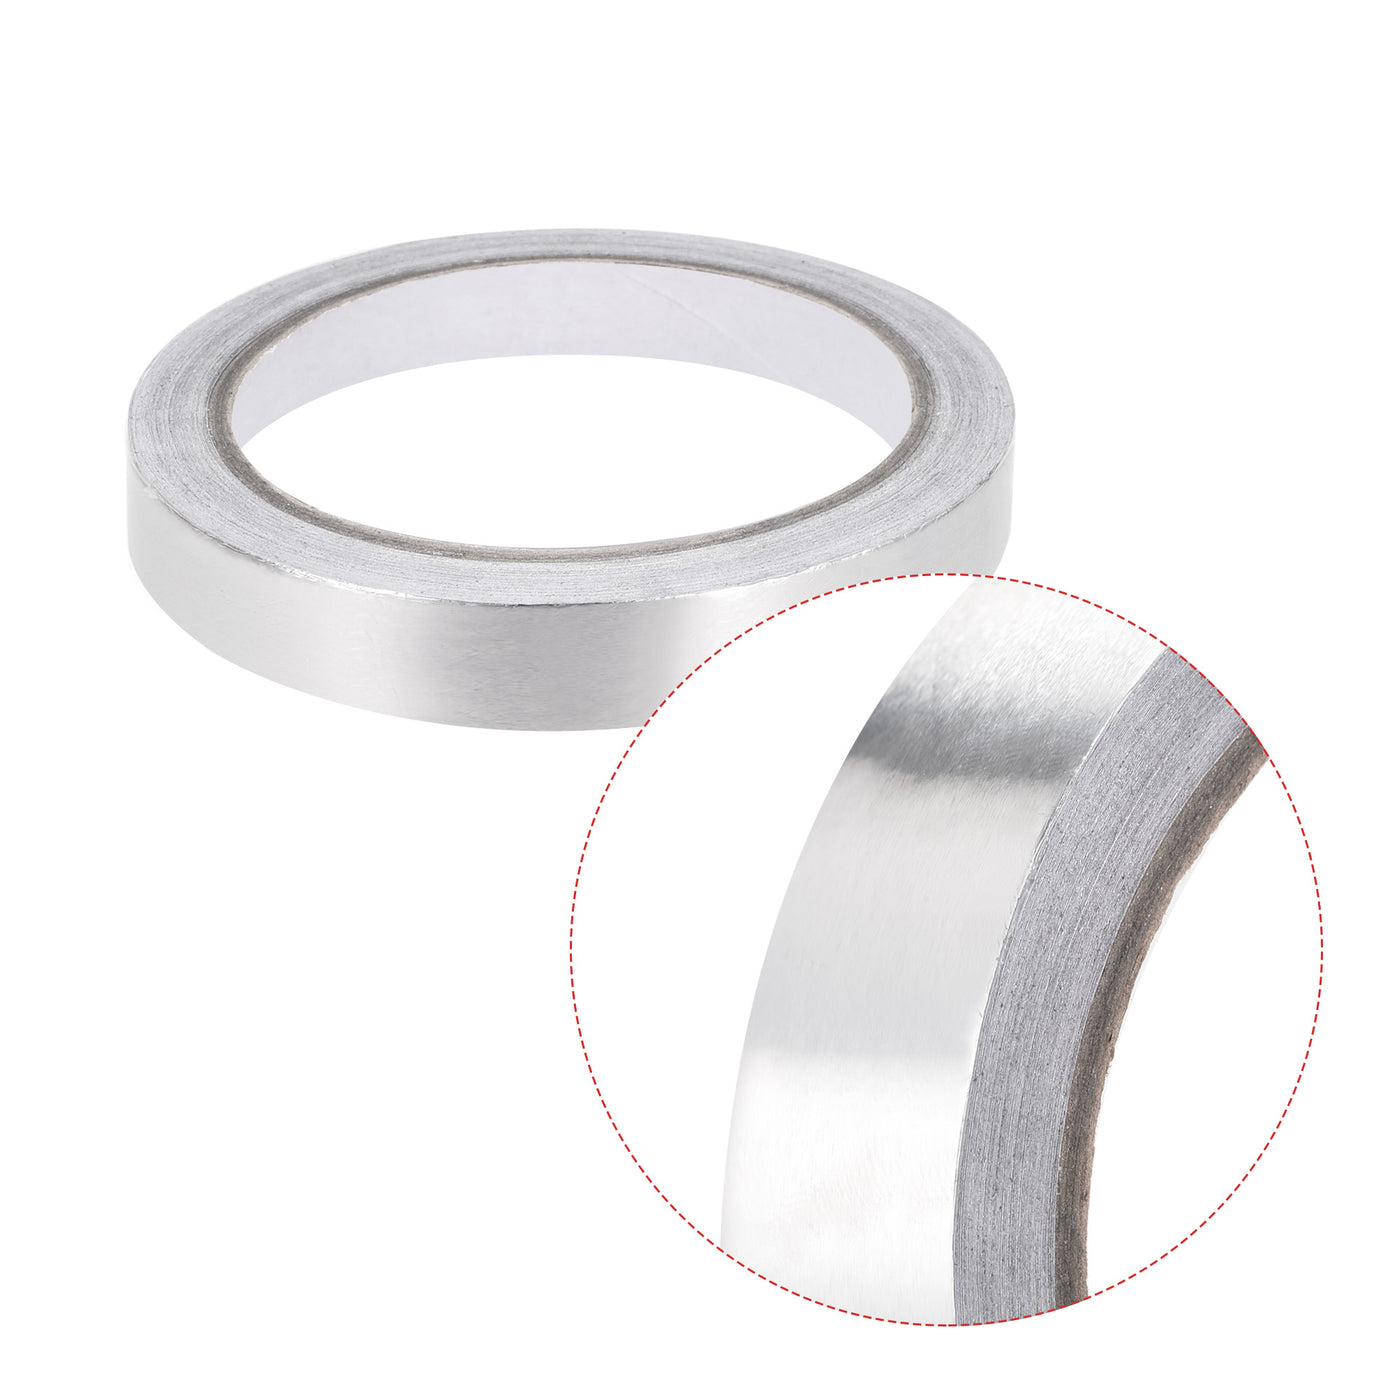 uxcell Uxcell 10mm Aluminum Foil Tape High Temperature Tape for HVAC, Sealing, Patching Hot and Cold Air Ducts Single Sided Adhesive Tape 20m/65ft